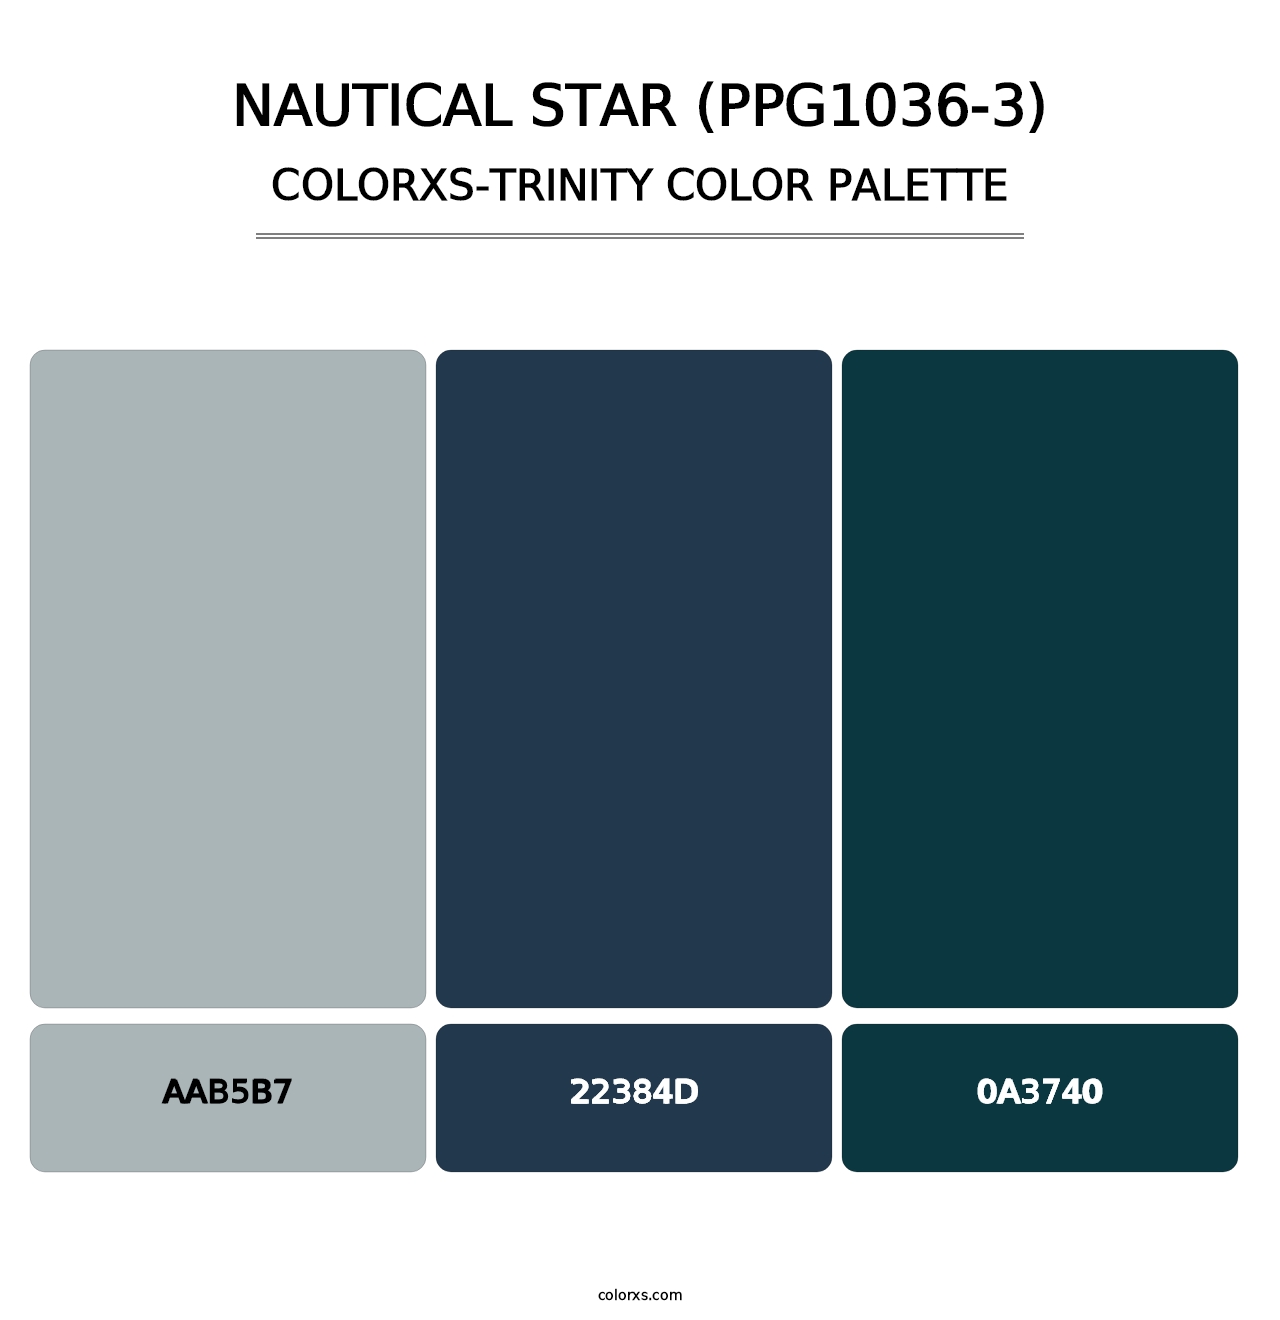 Nautical Star (PPG1036-3) - Colorxs Trinity Palette